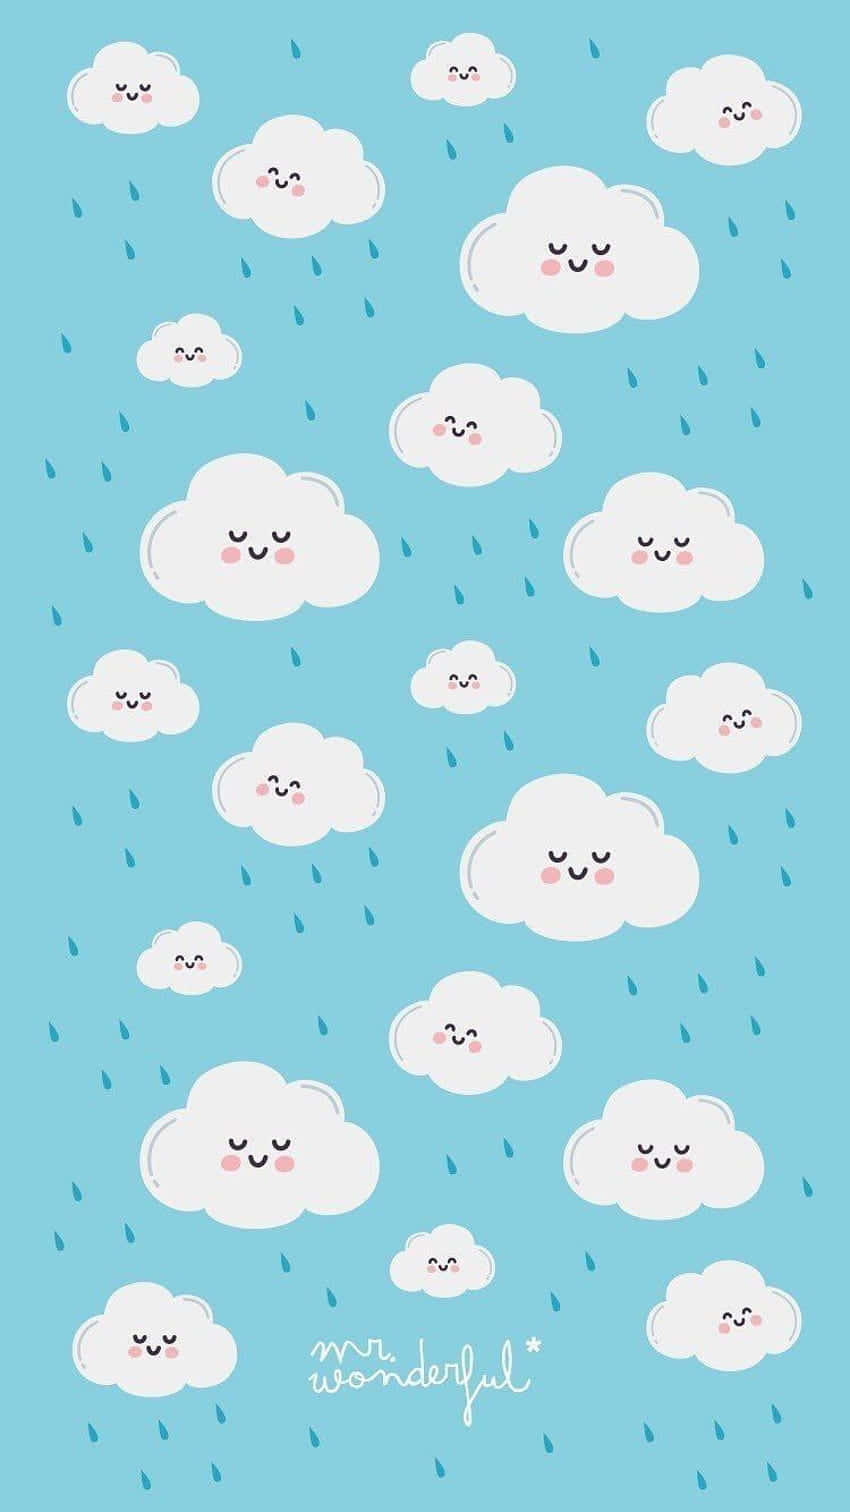 Cute Clouds With Faces Wallpaper